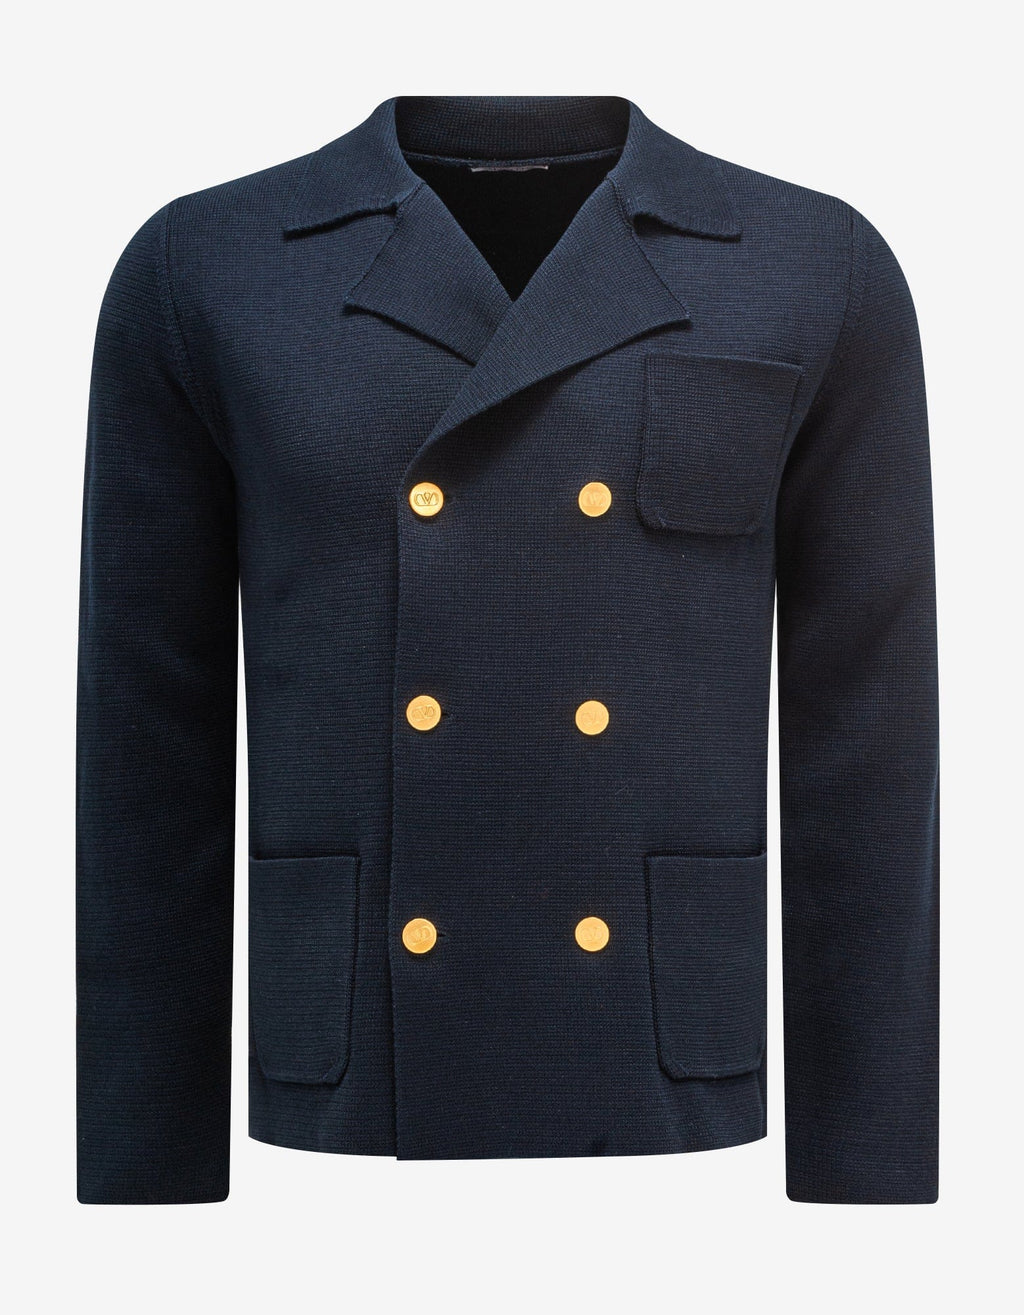 Valentino Valentino Navy Blue Double-Breasted Knitted Jacket